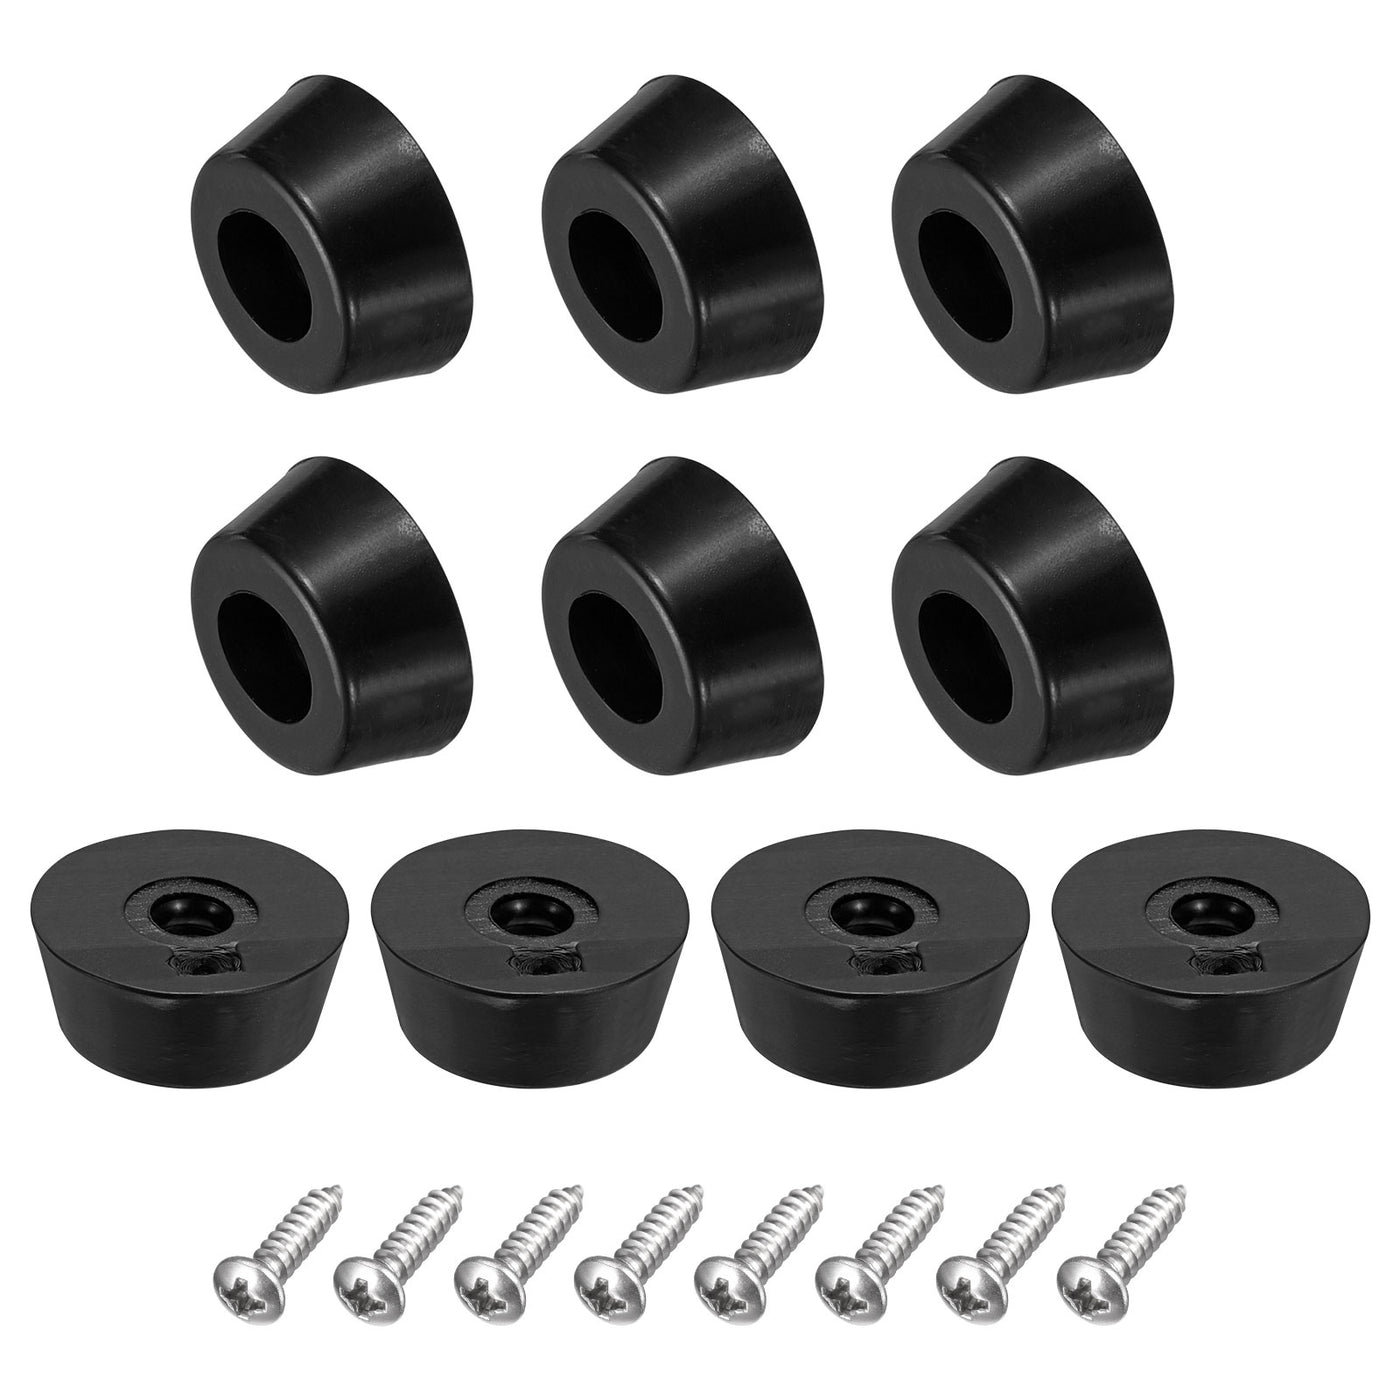 uxcell Uxcell 10Pcs Rubber Bumper Feet, 0.31" H x 0.79" W Round Pads with Stainless Steel Washer and Screws for Furniture, Appliances, Electronics